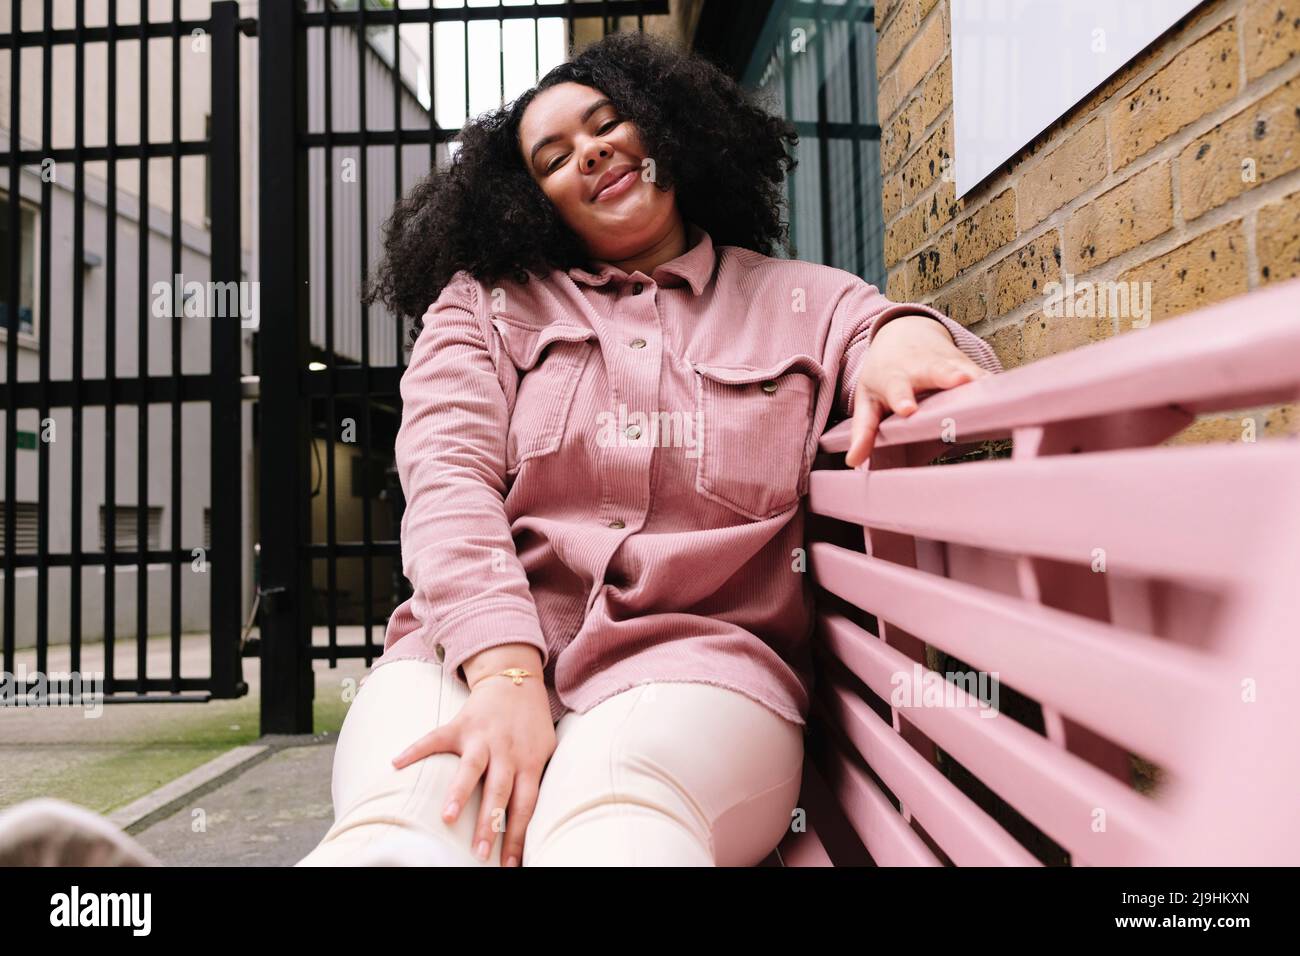 Smiling woman with curly hair sitting on pink bench Stock Photo